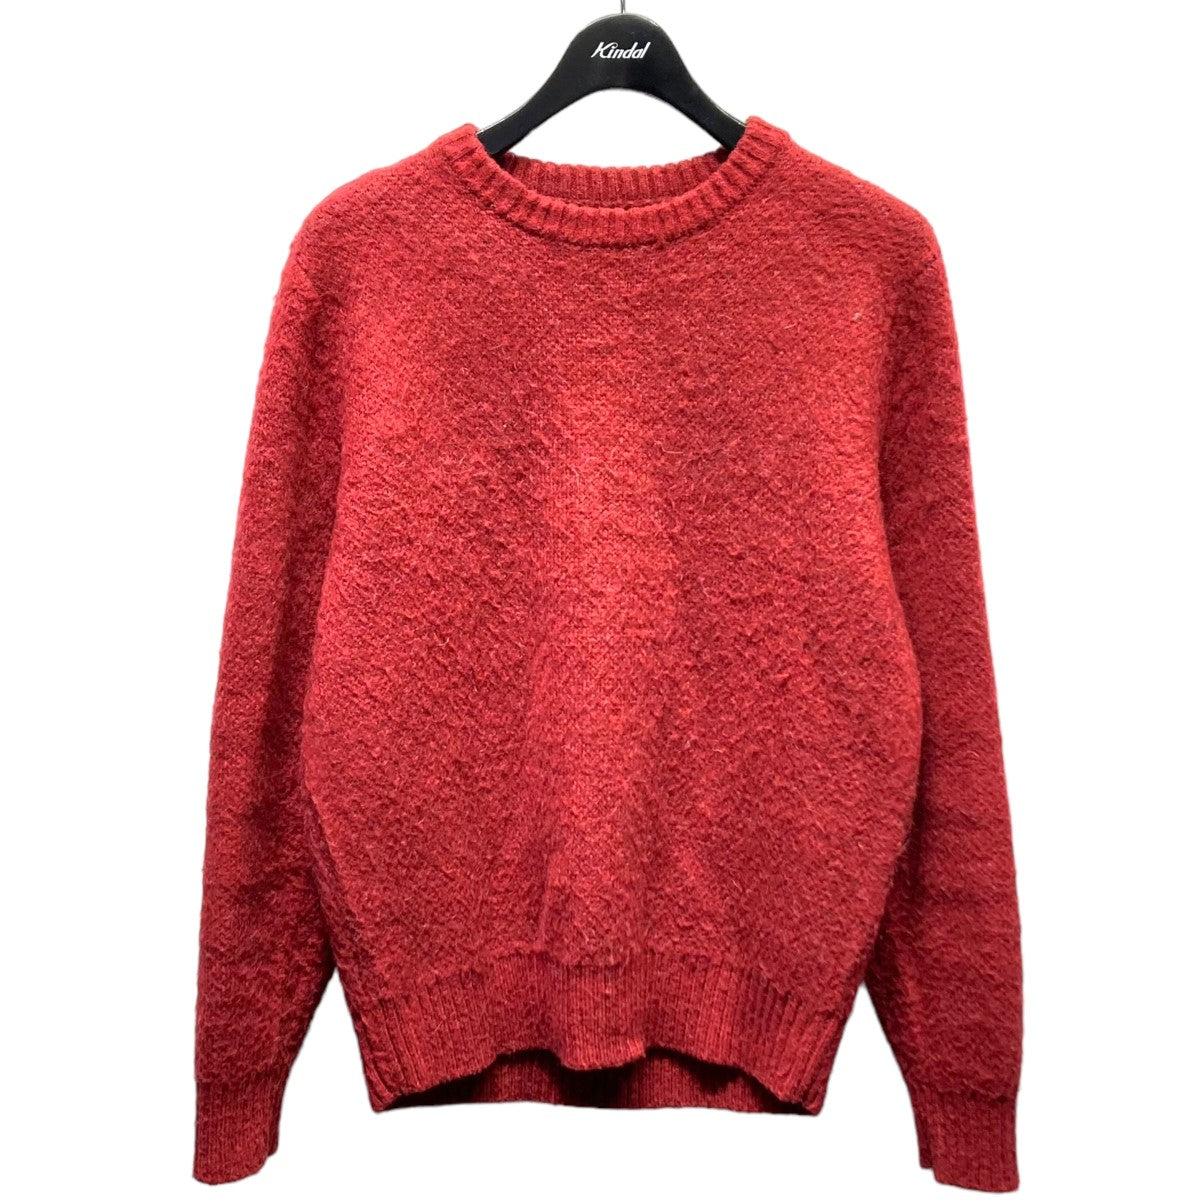 Stussy(ステューシー) 8 BALL HEAVY BRUSHED MOHAIR SWEATER ニット 